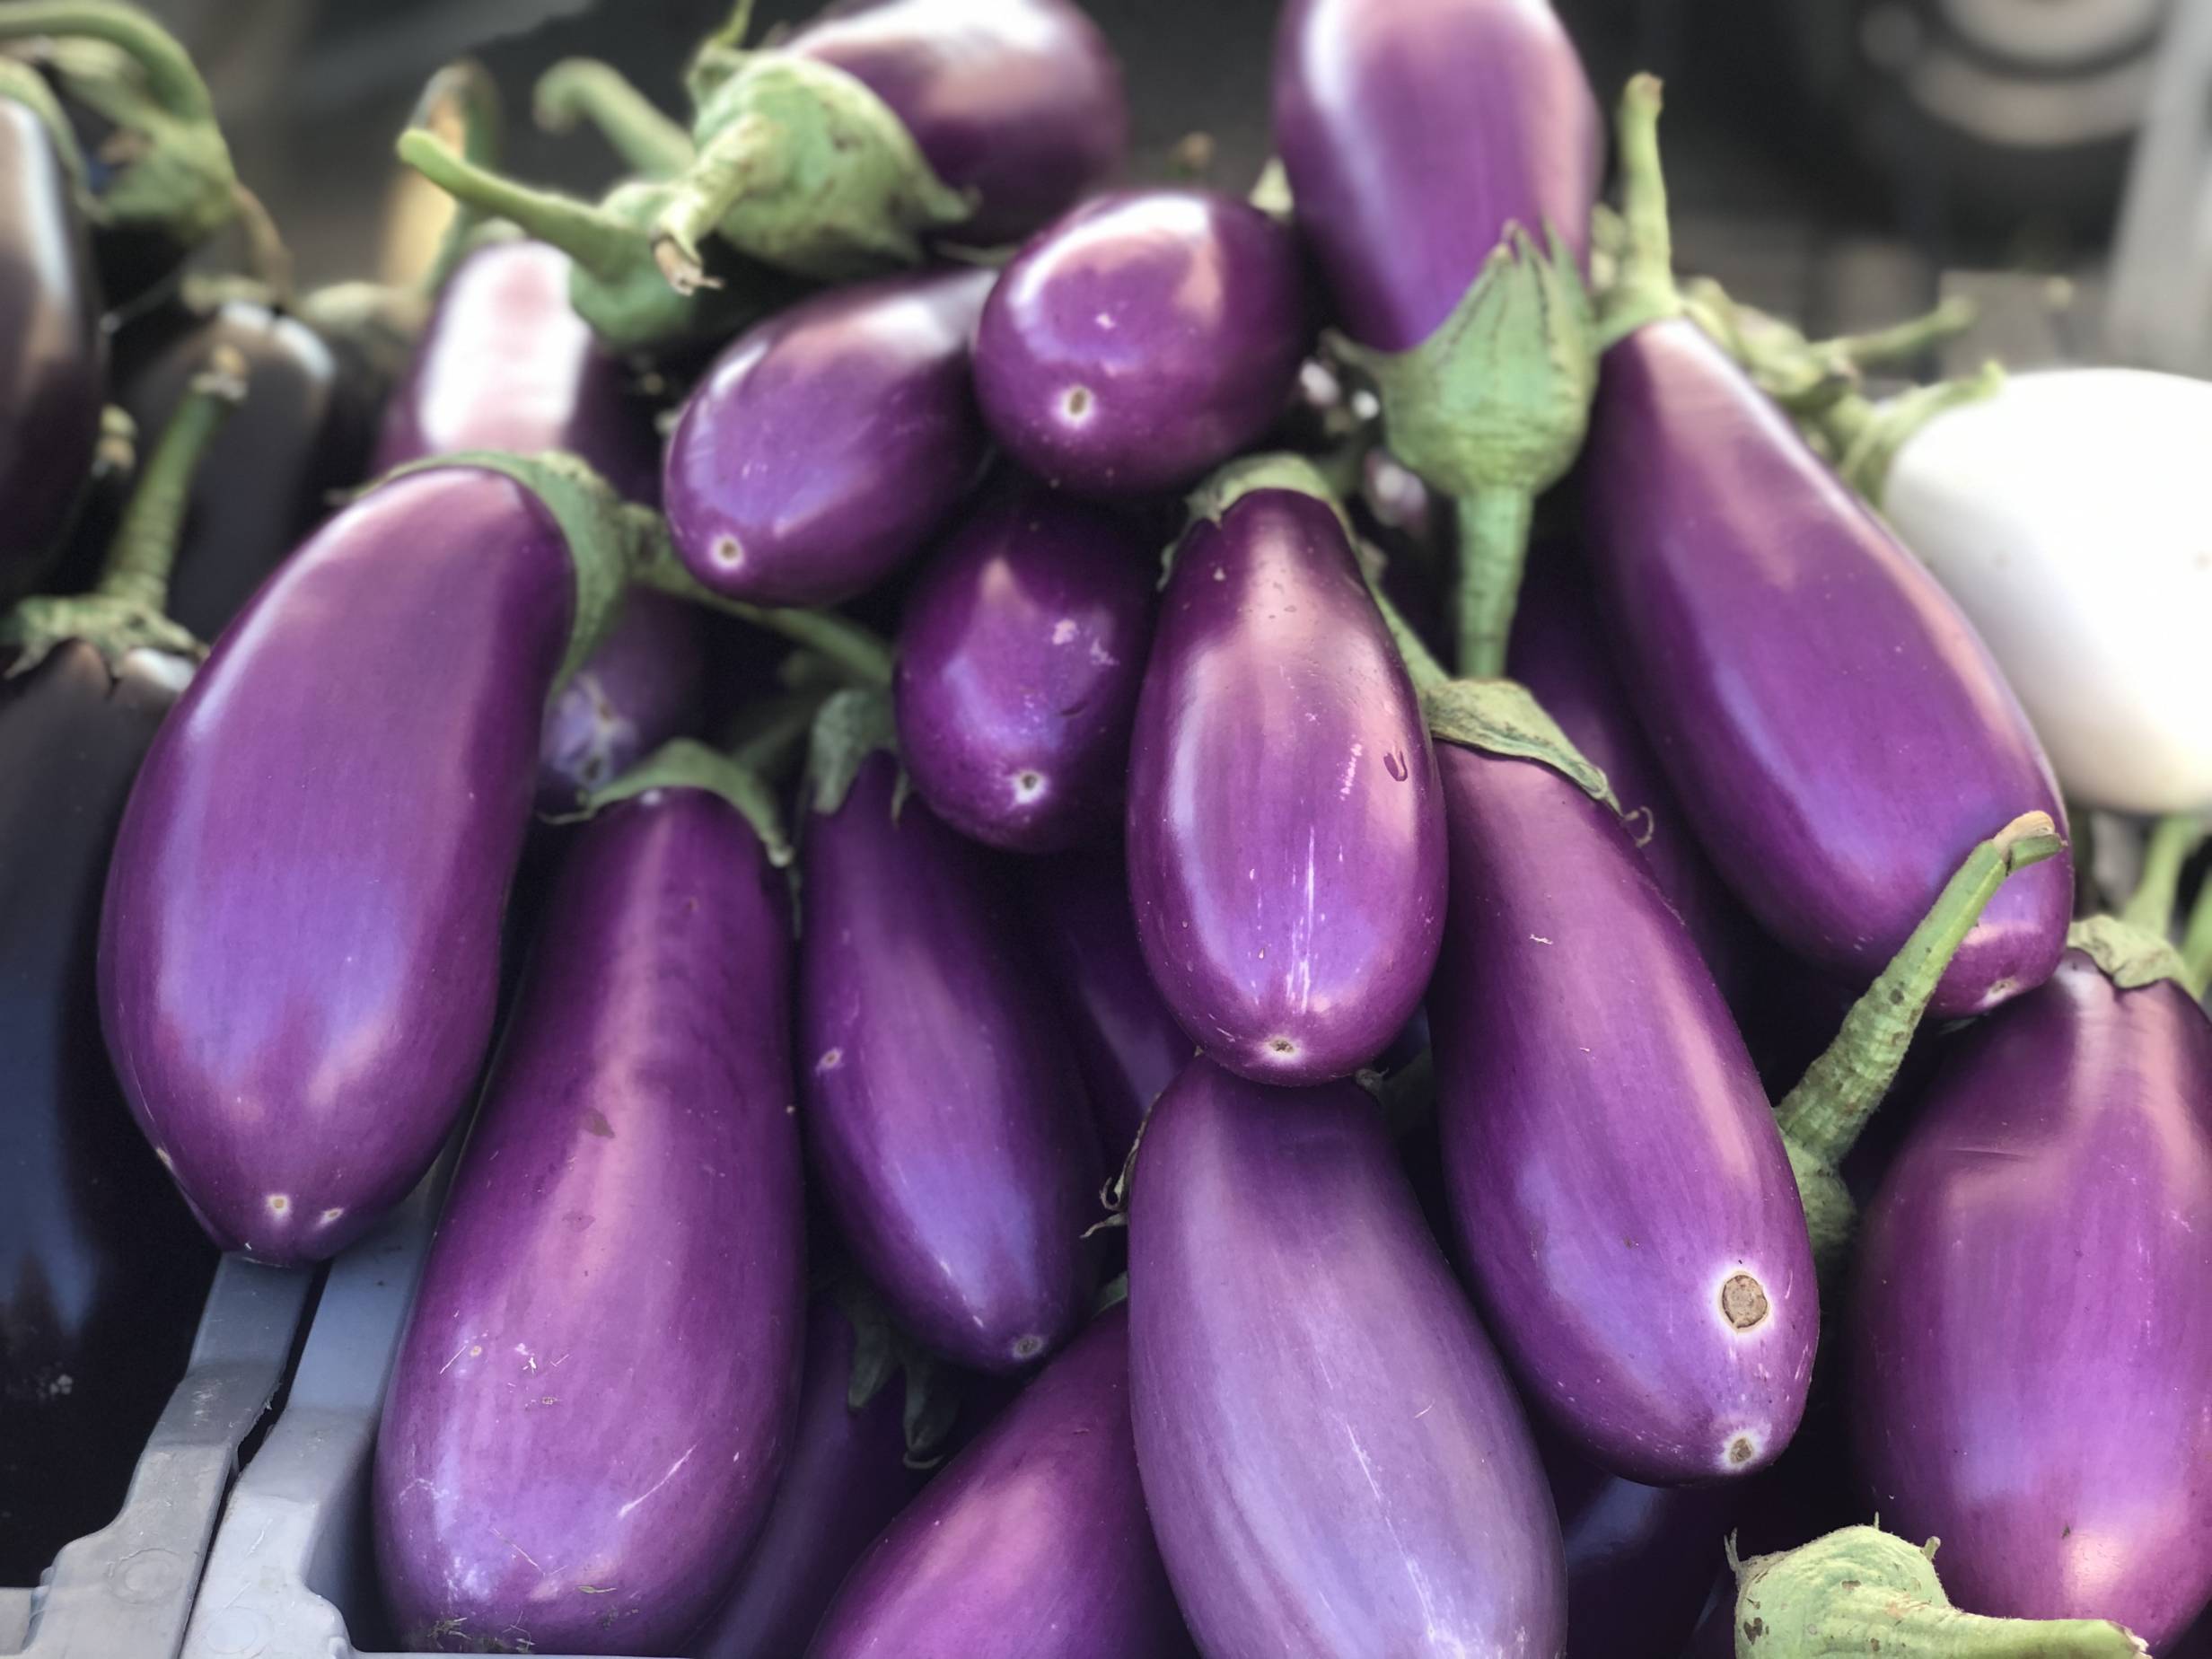 Many bright purple eggplants are stacked on top of each other with little green tops facing away from the camera. Photo by Alyssa Buckley.